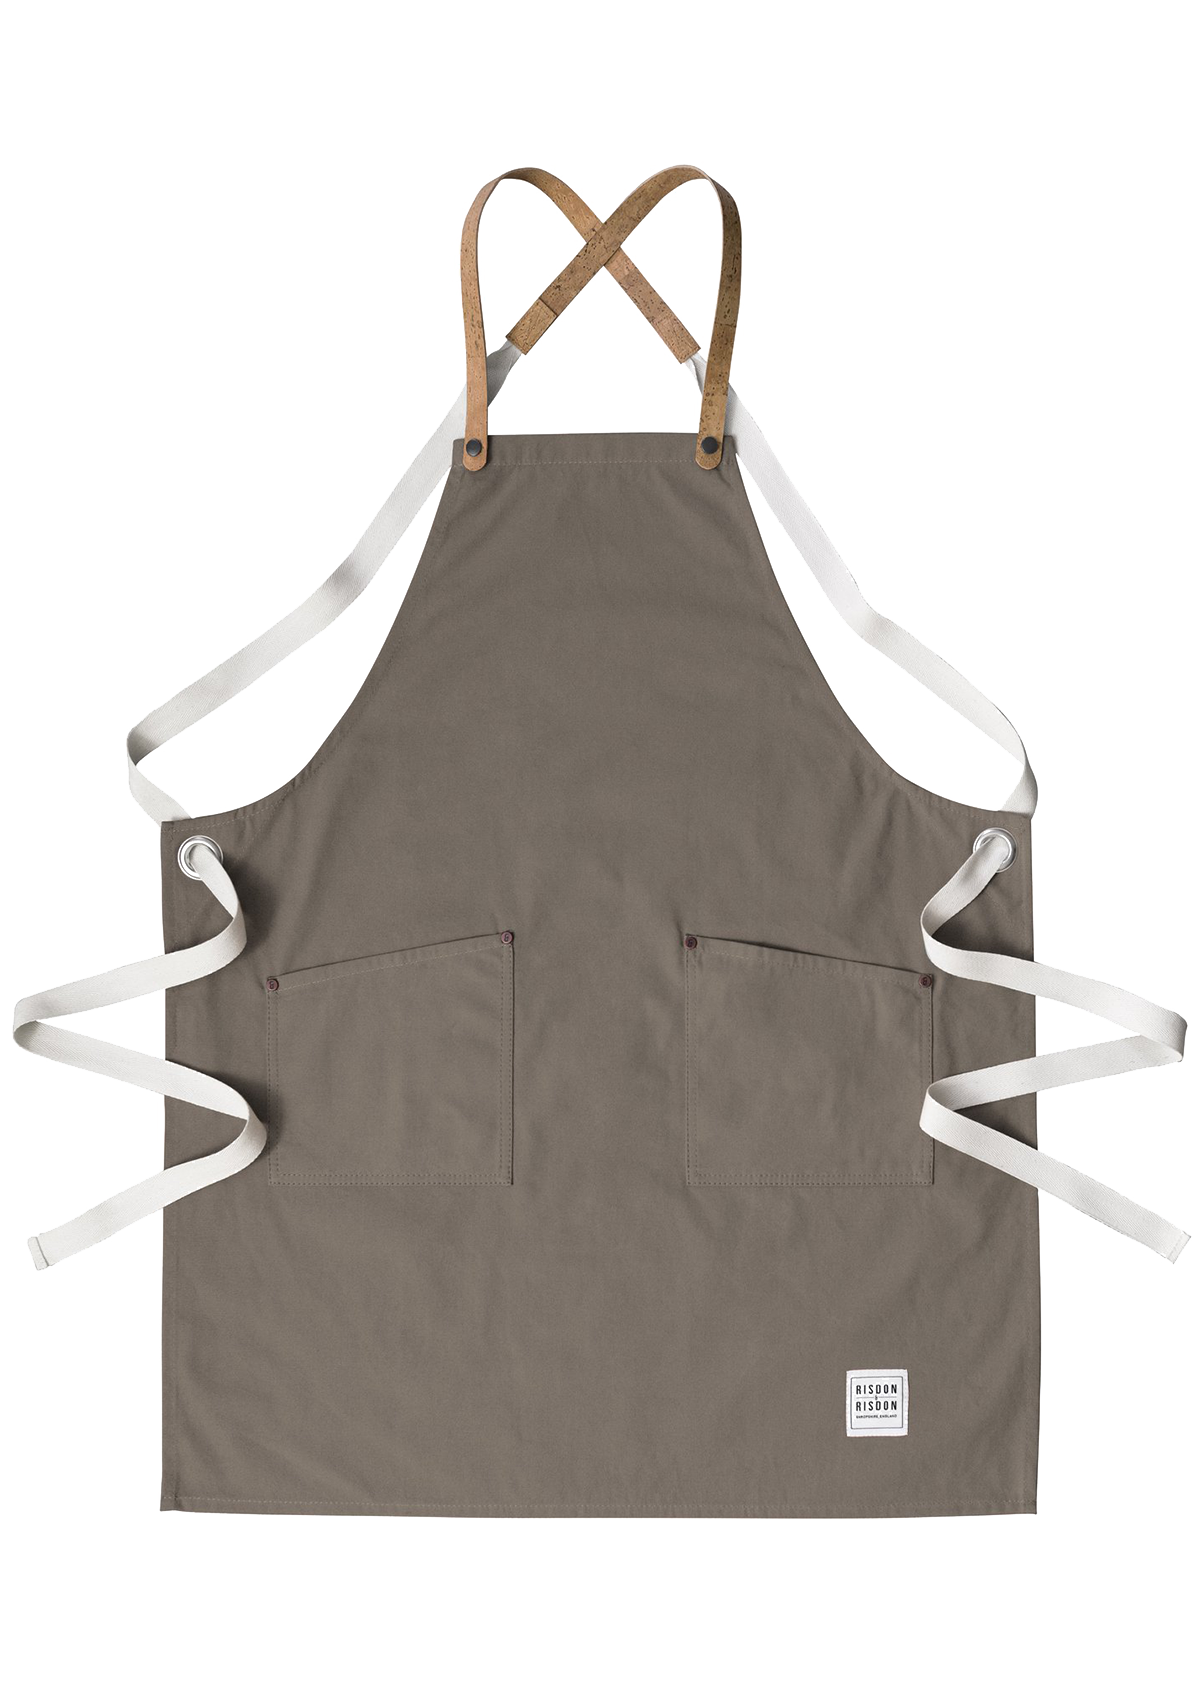 Handcrafted Apron Studio with Cork Straps Unisex